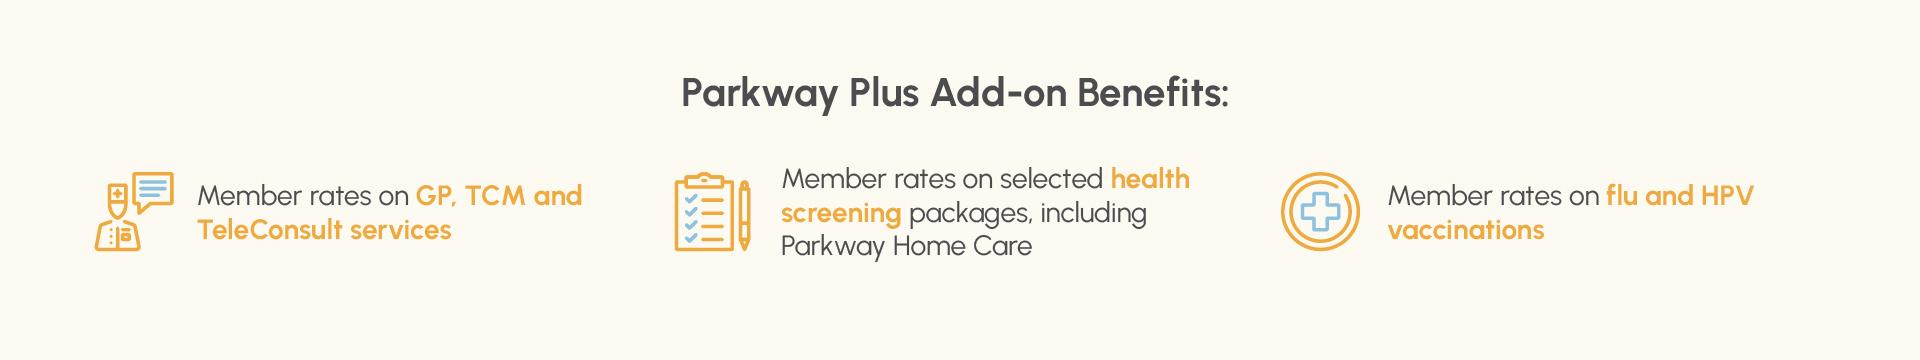 Parkway Plus Add-on Benefits